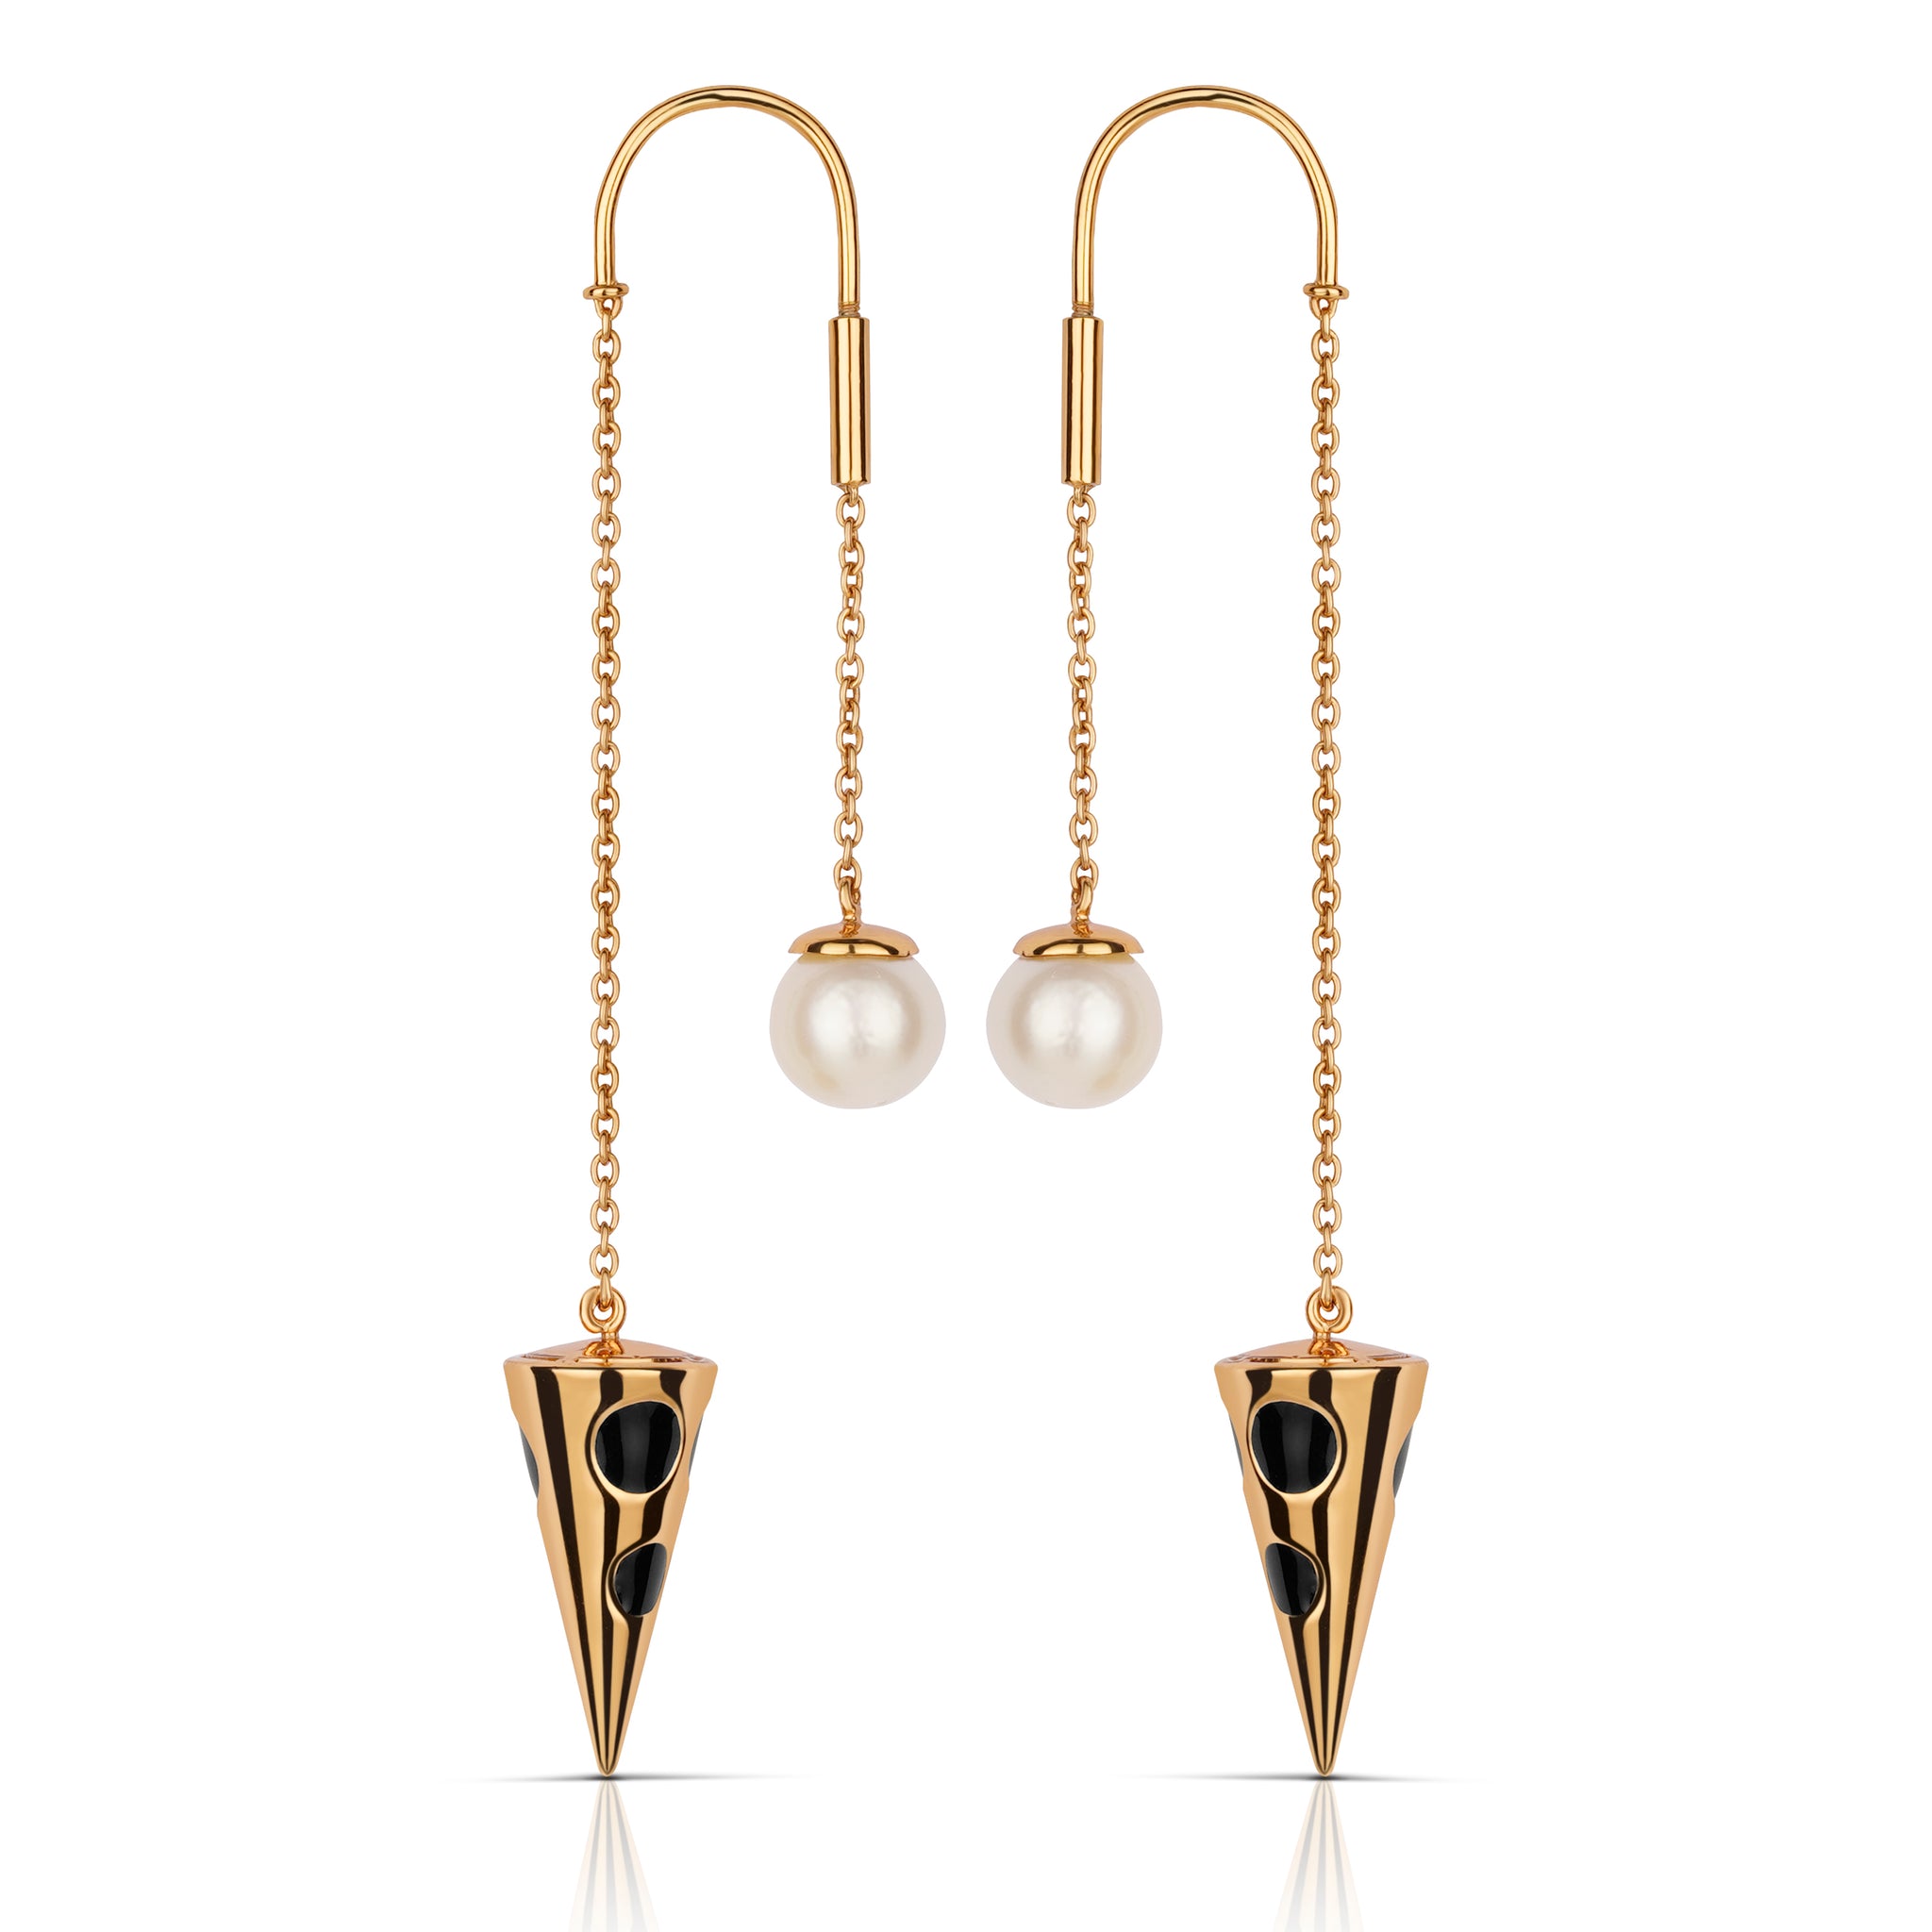 Poise & Pearl Earrings - Gold and Black